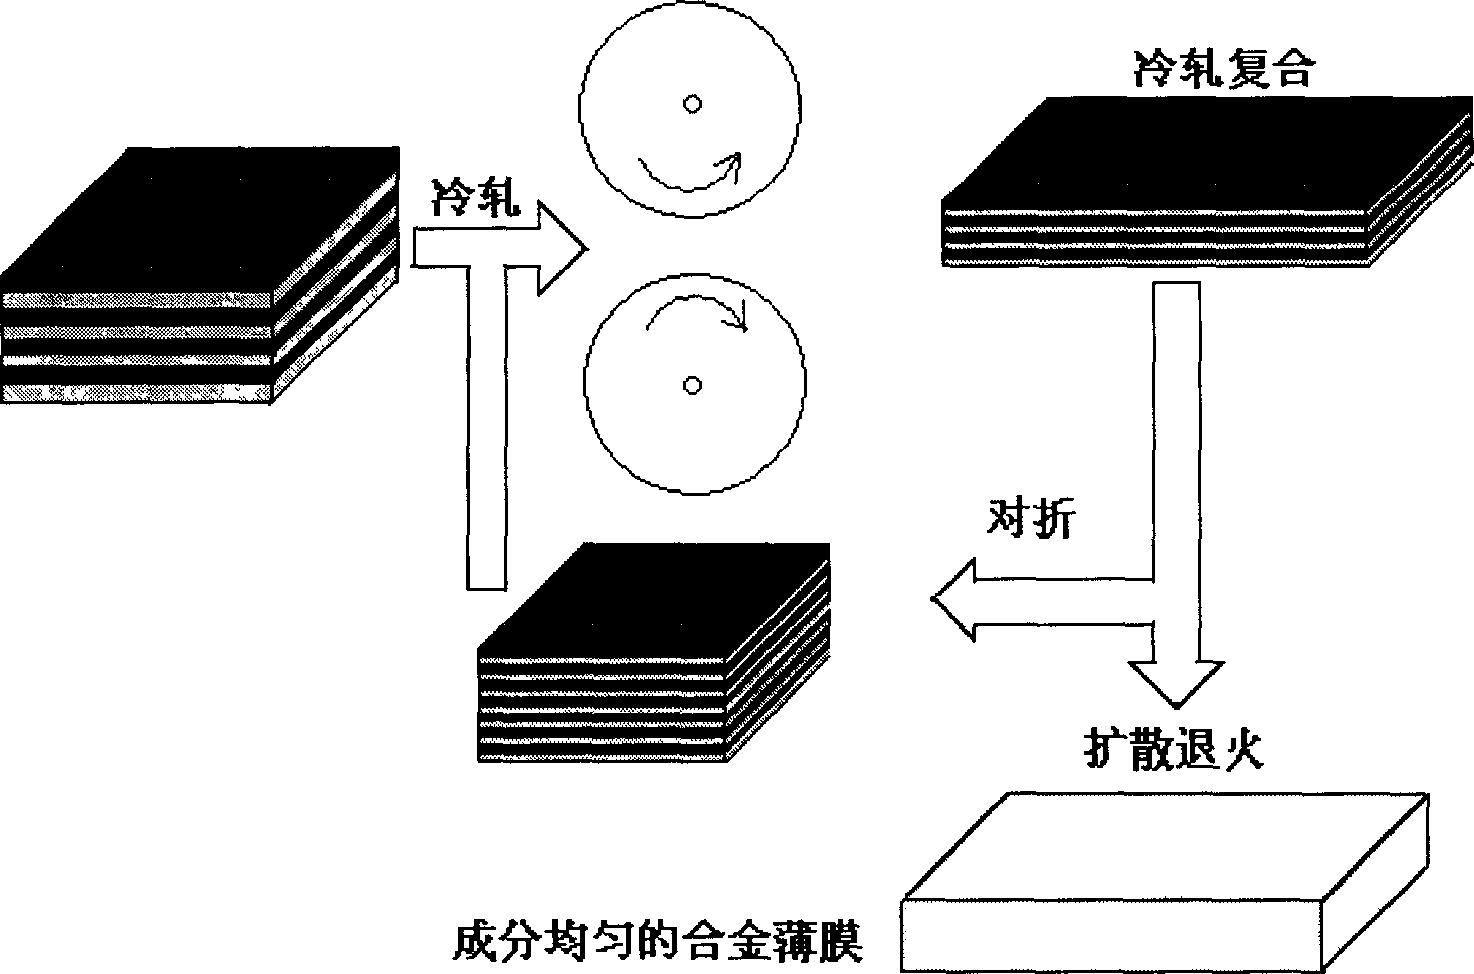 Method for preparing NiTiHf shape memory alloy film by cold rolling ultra-thin laminated alloy foil